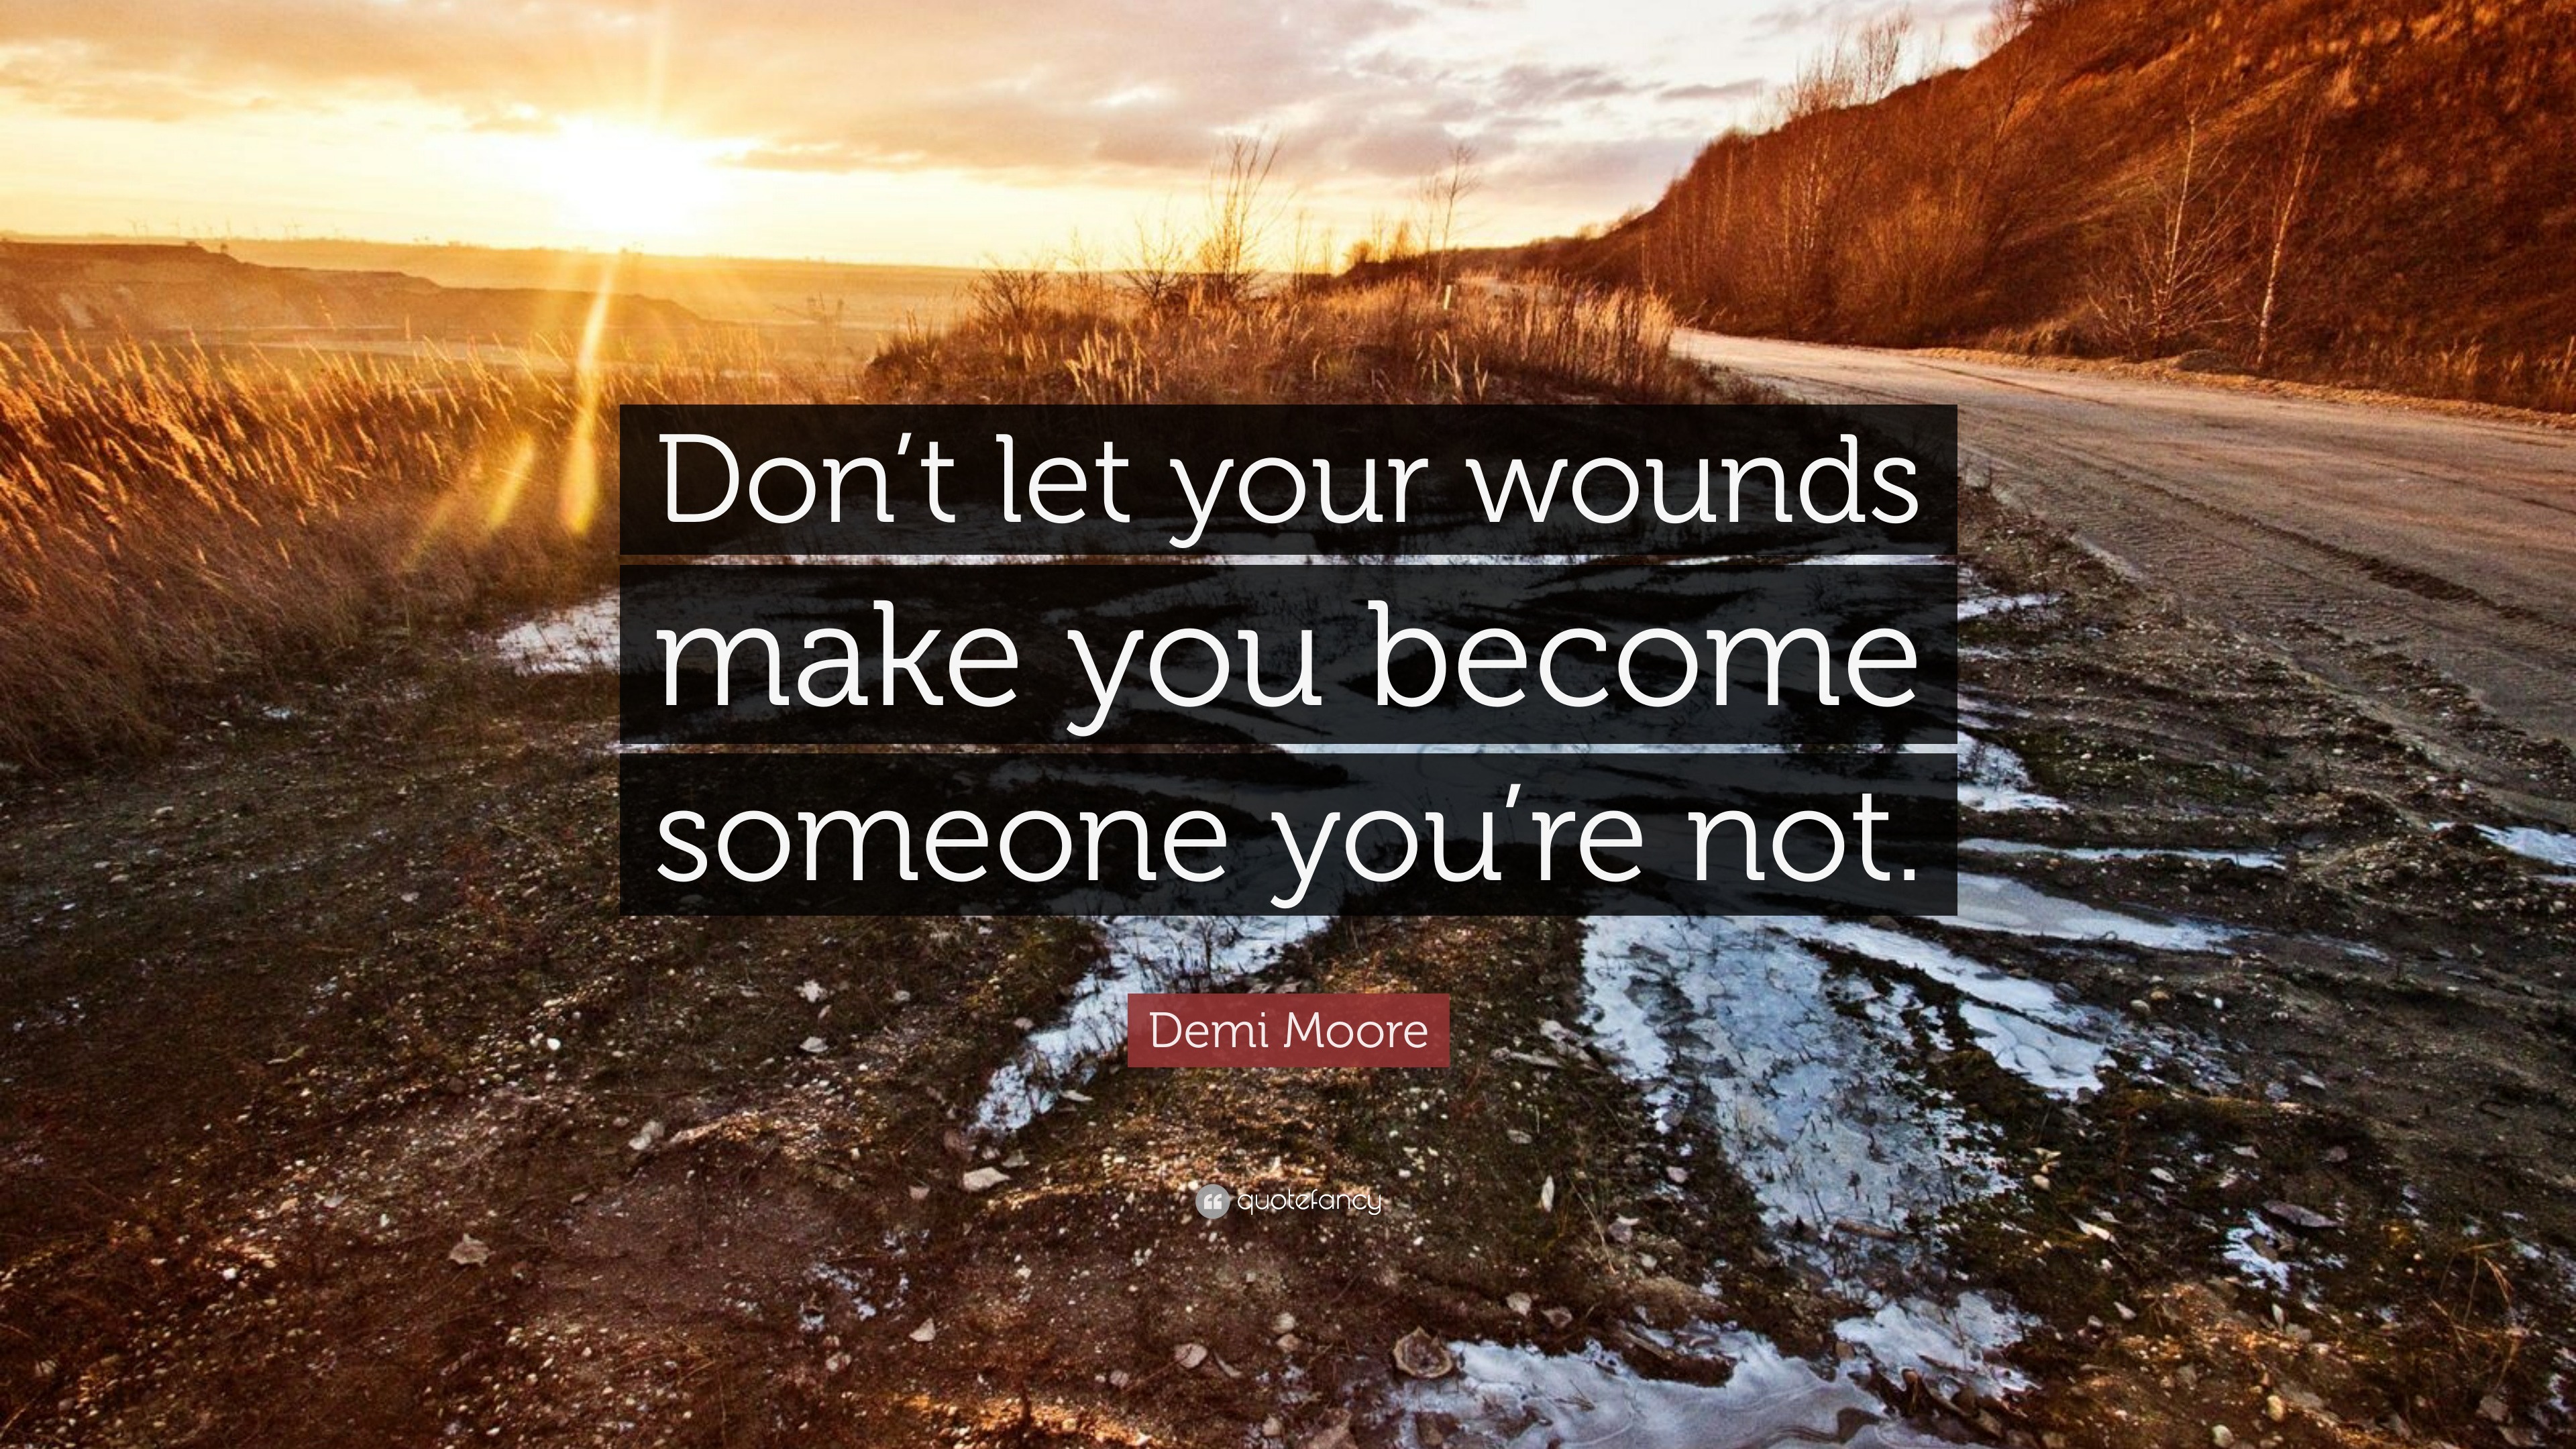 Demi Moore Quote: “Don’t let your wounds make you become someone you’re ...